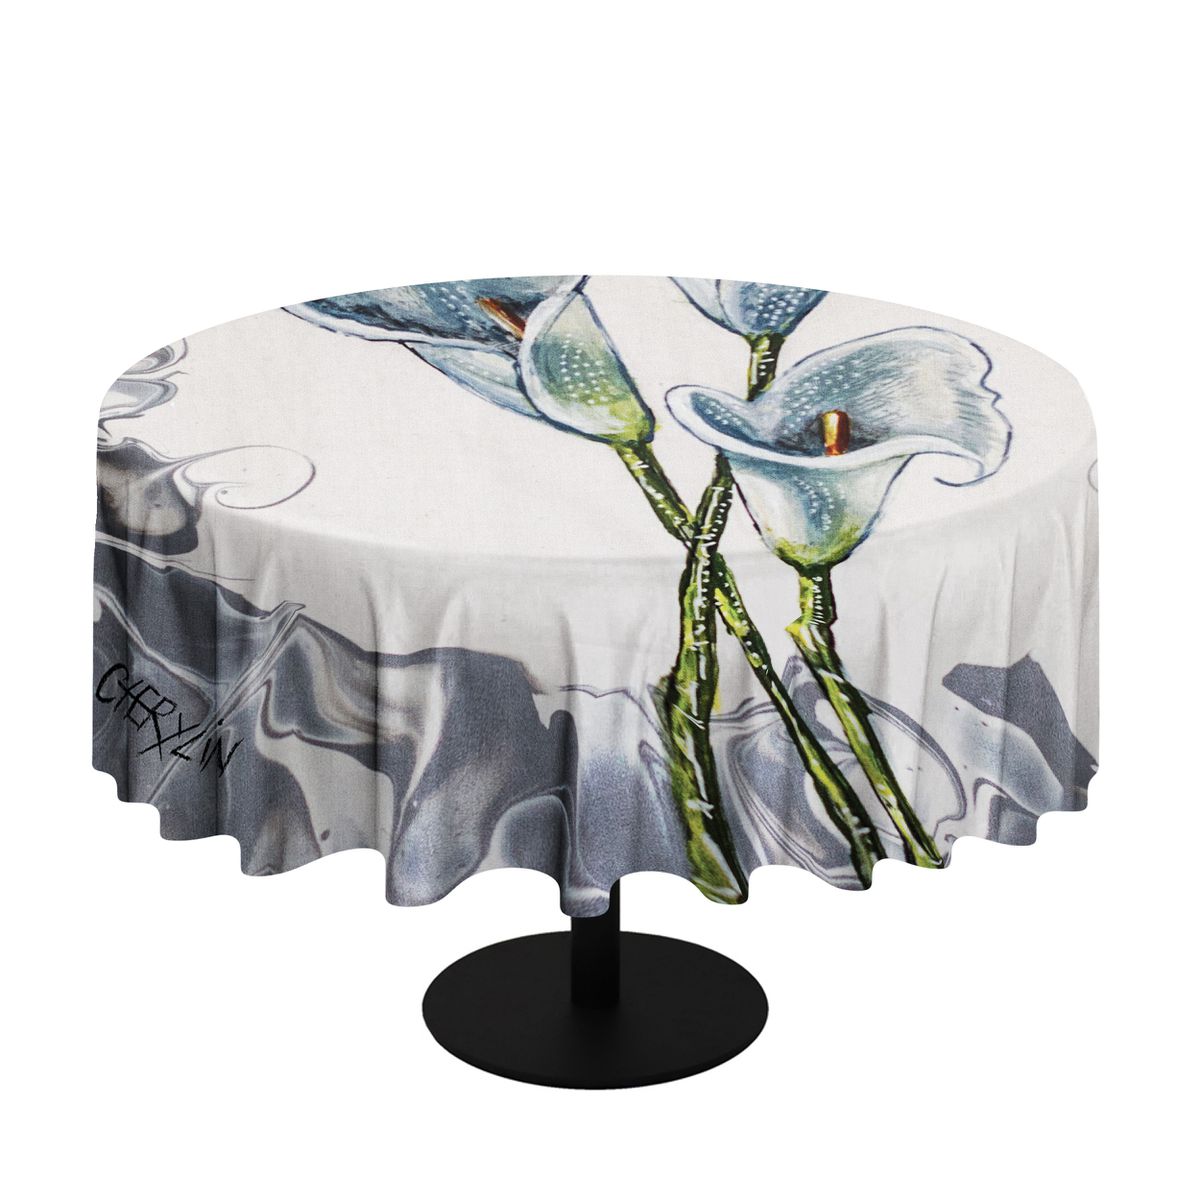 Arum Lily By Cherylin Louw Round Tablecloth